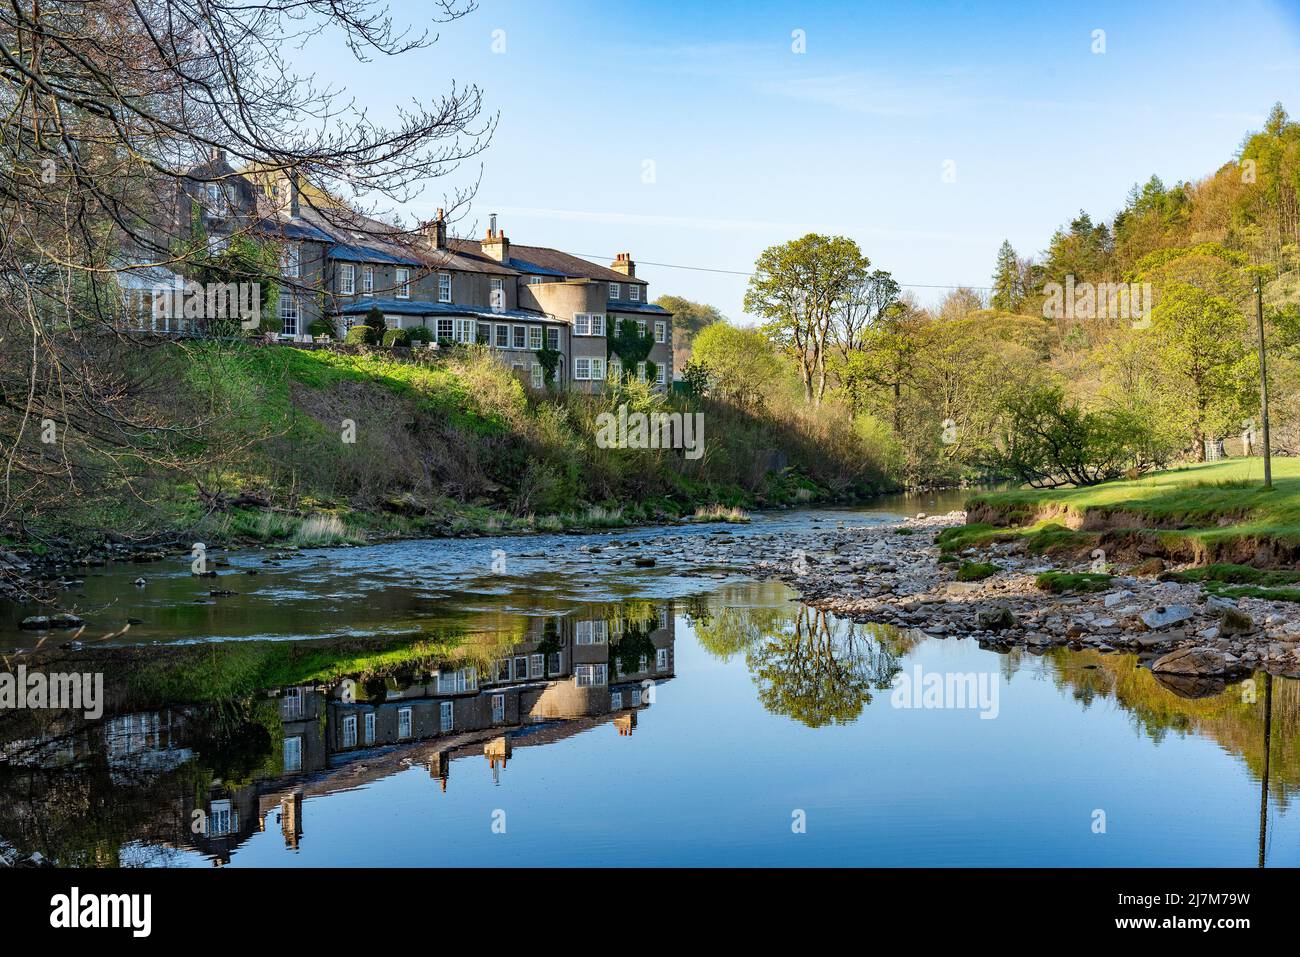 The Inn at Whitewell, Clitheroe, Lancashire, Royaume-Uni. Banque D'Images